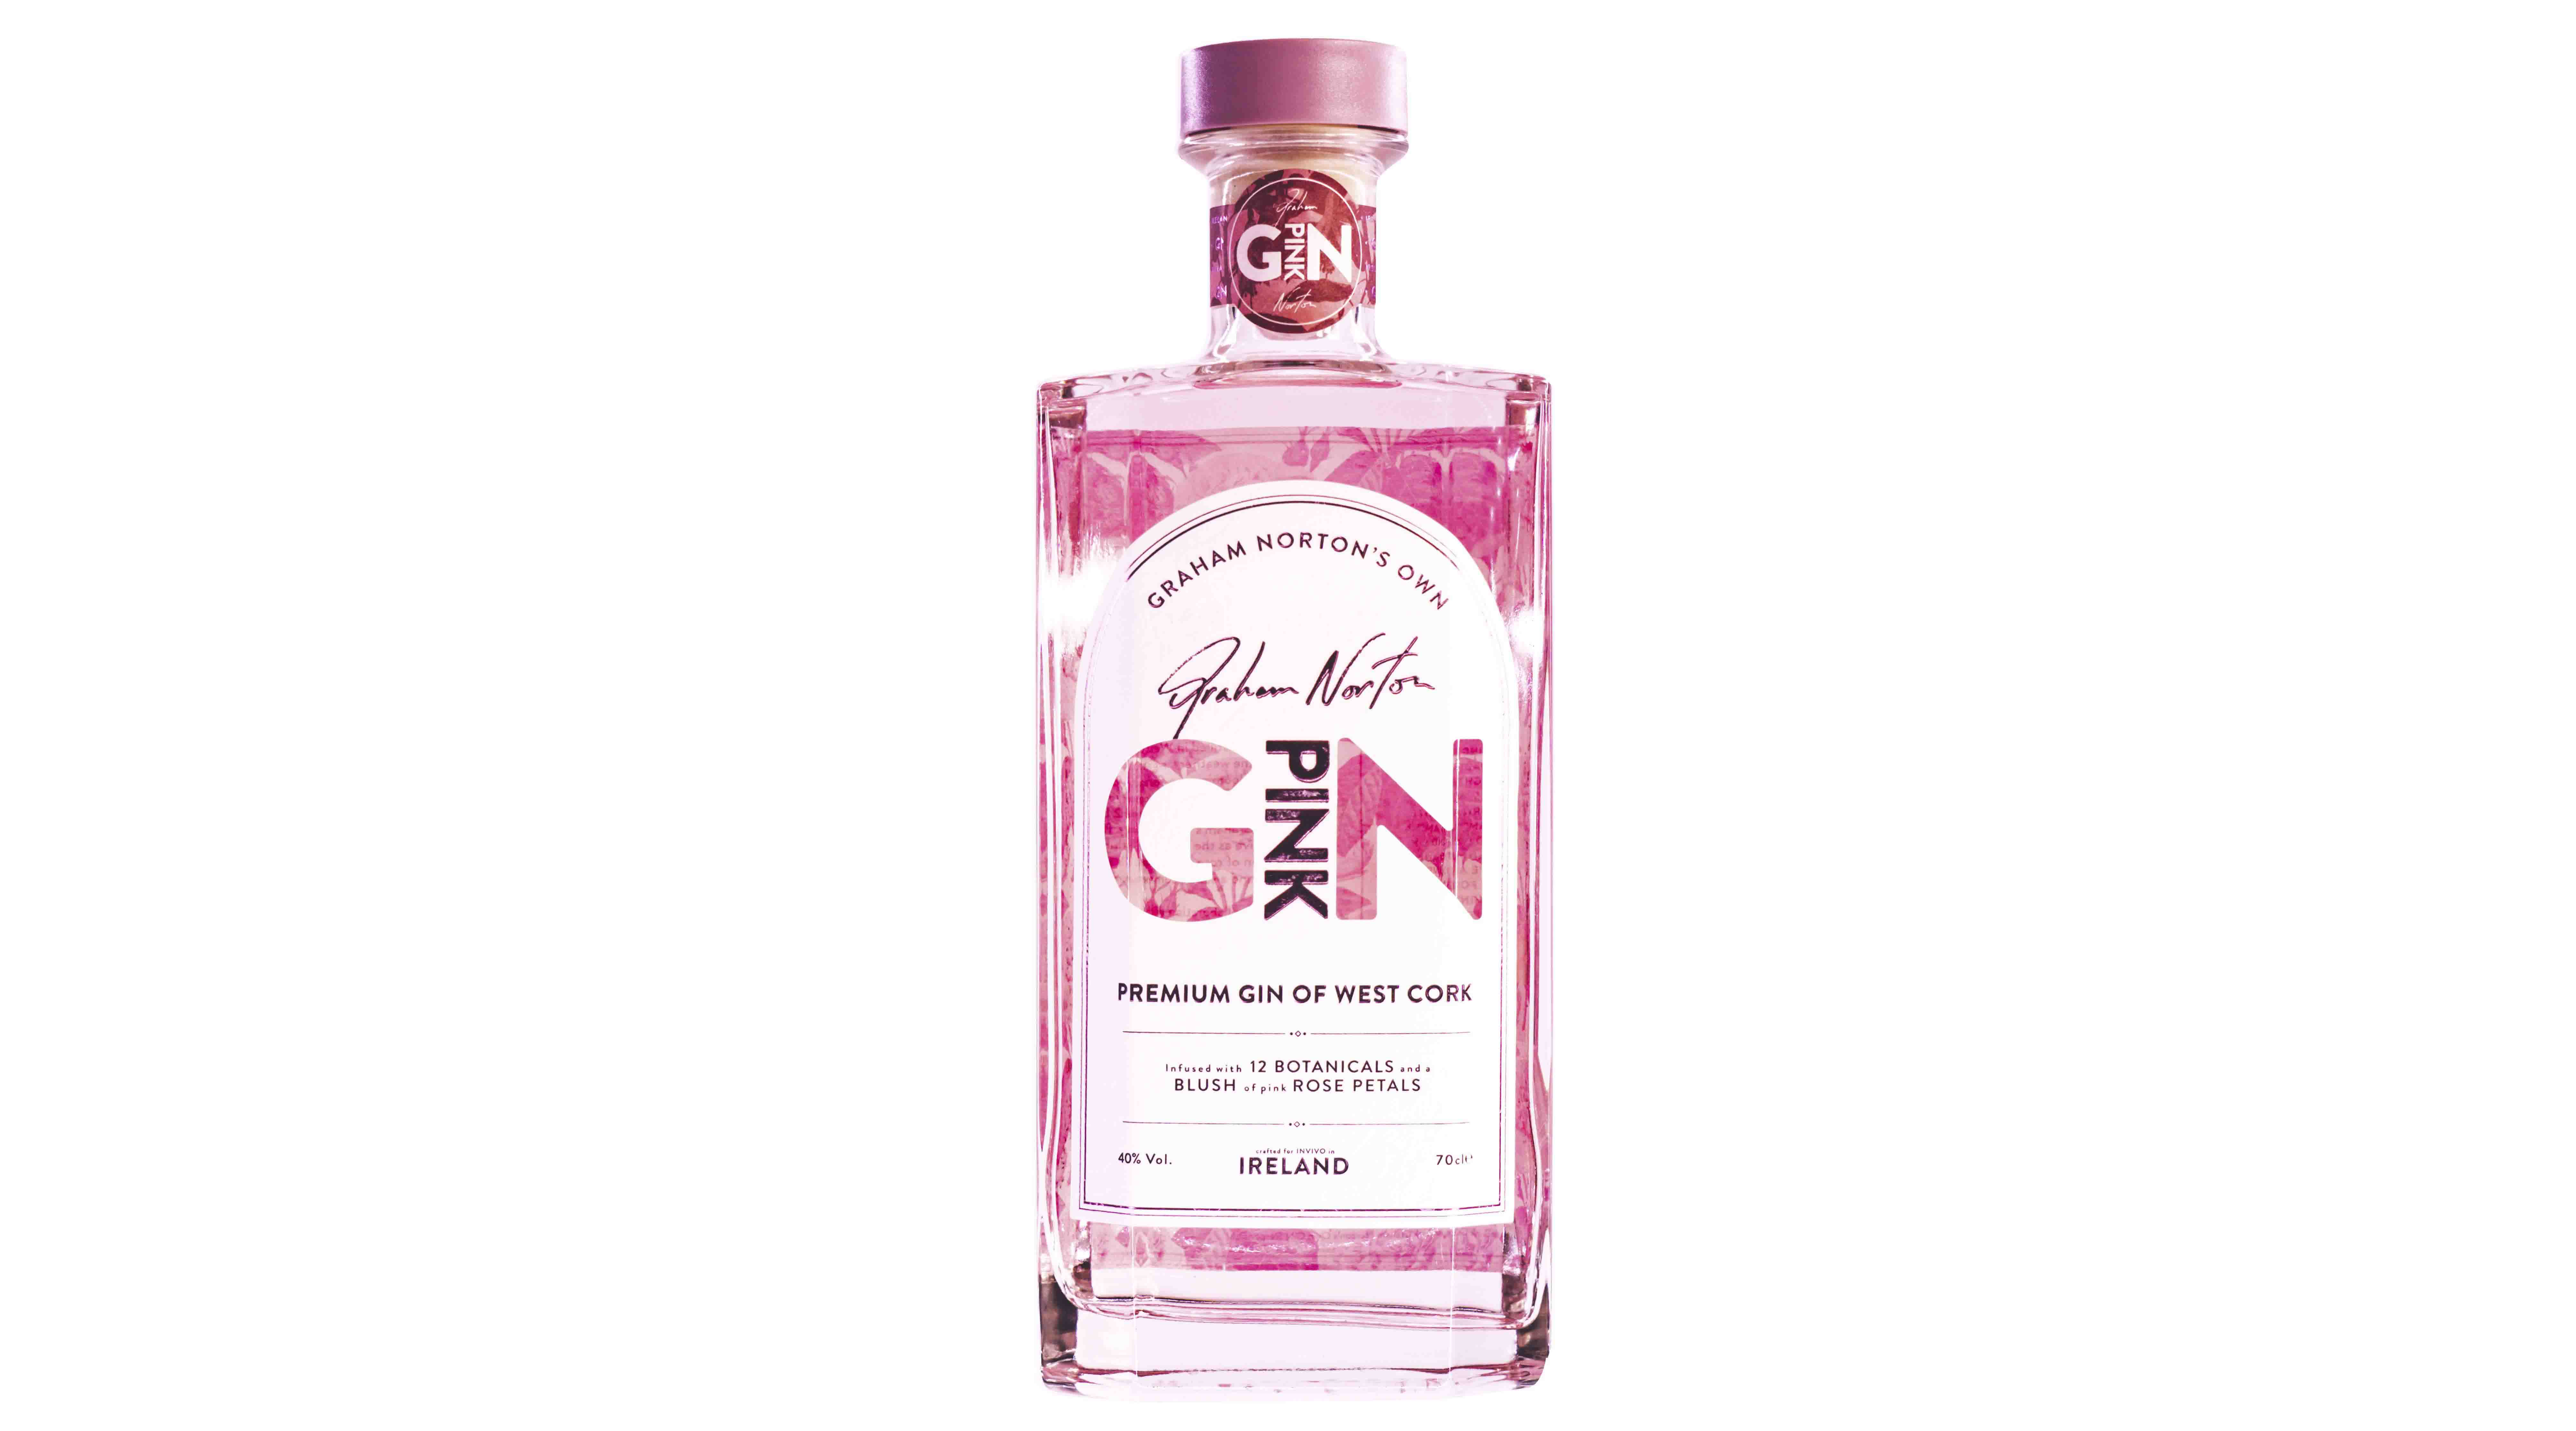 The official launch of the Graham Norton Irish Pink Gin took place on March 23rd at the Southern Region Marketing Institute of Ireland Ball held at the Rochestown Park Hotel.